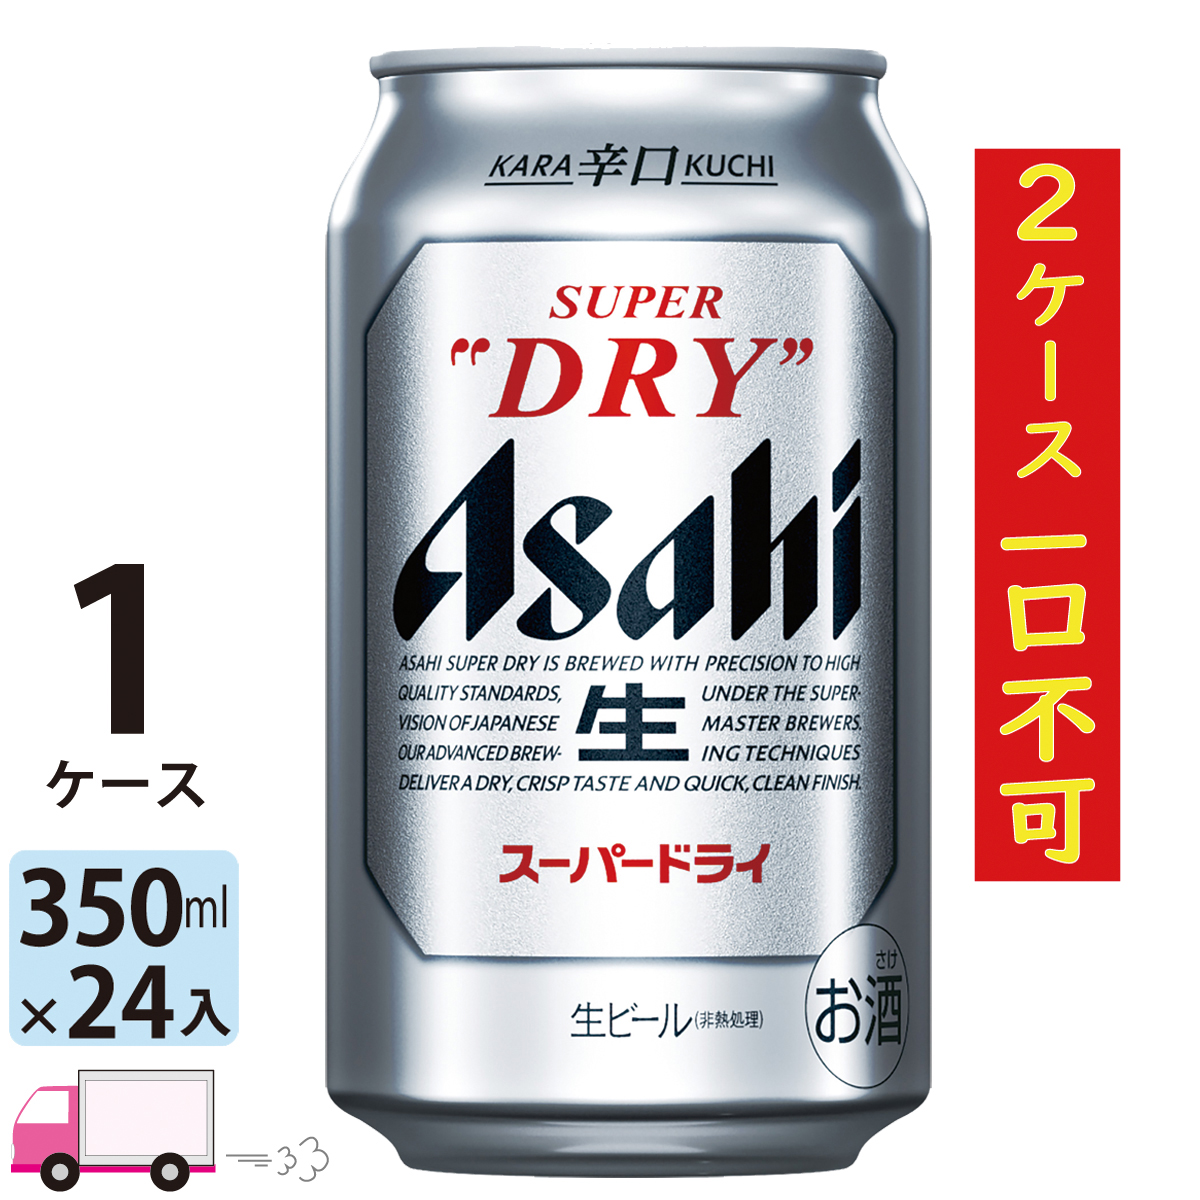  Asahi beer super dry 350ml 24 can 1 case (24ps.@) 1 case limitation 2 case one . un- possible 